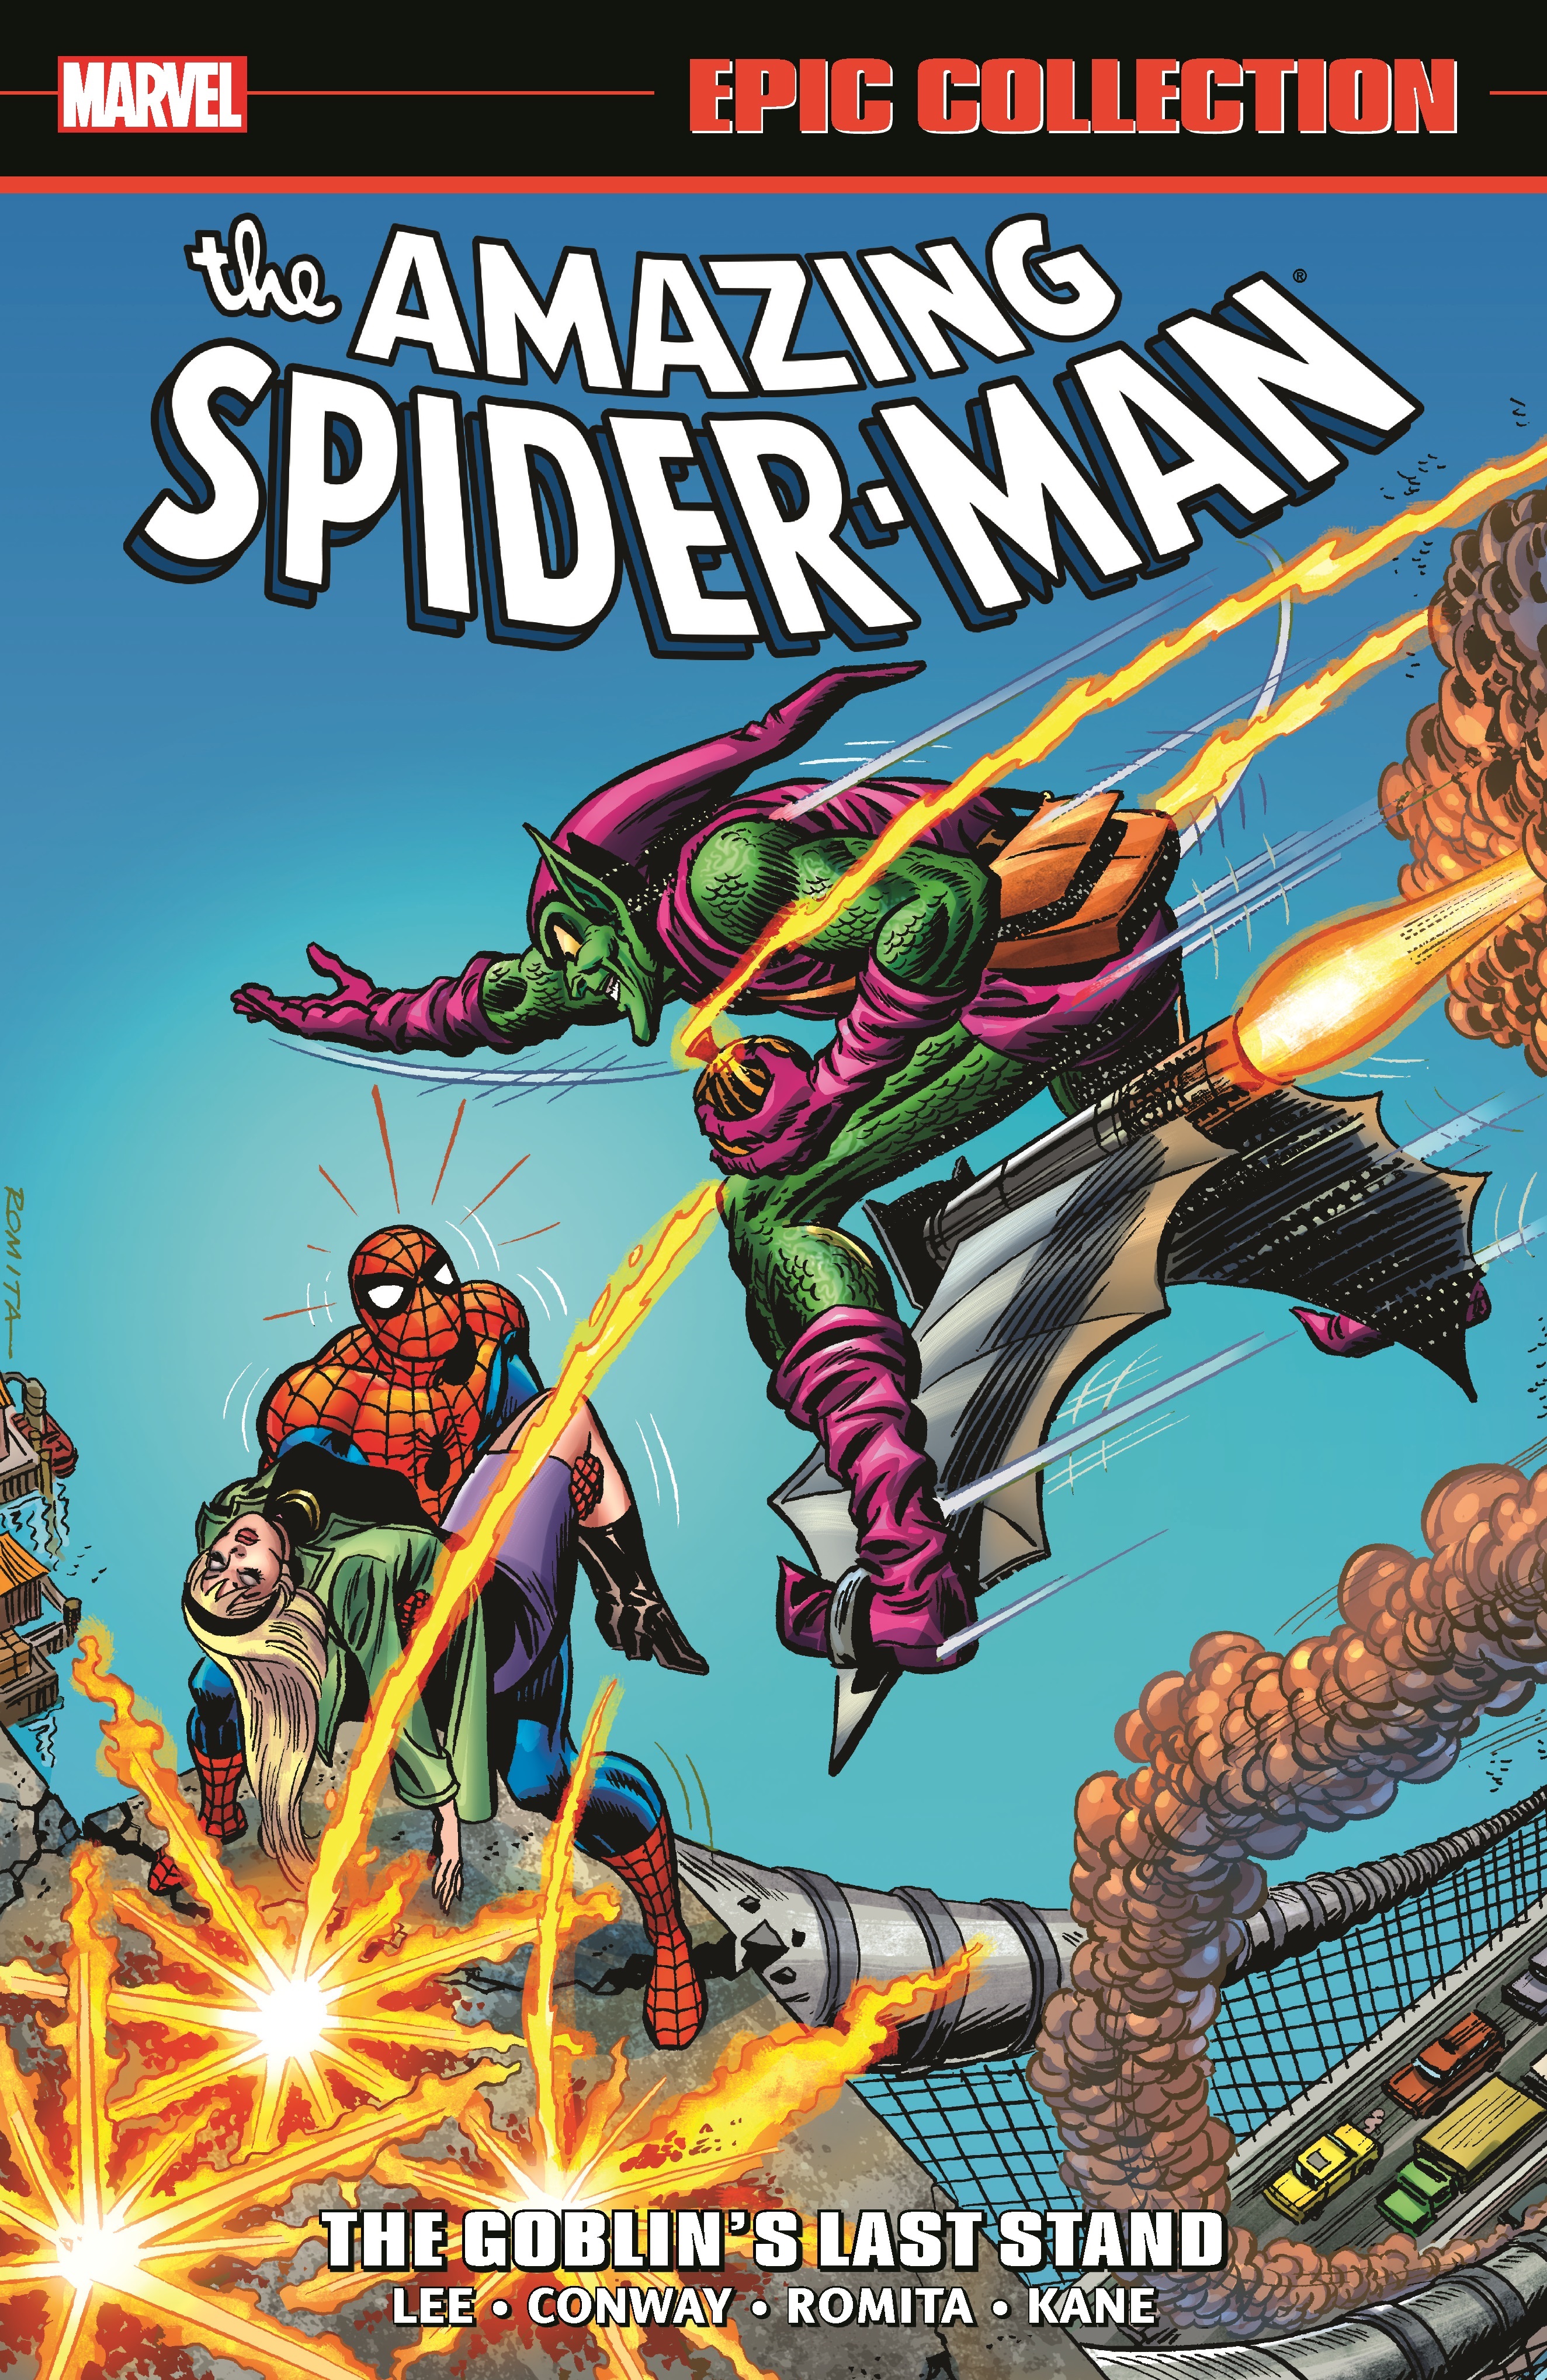 AMAZING SPIDER-MAN EPIC COLLECTION: THE GOBLIN'S LAST STAND TPB (Trade Paperback)